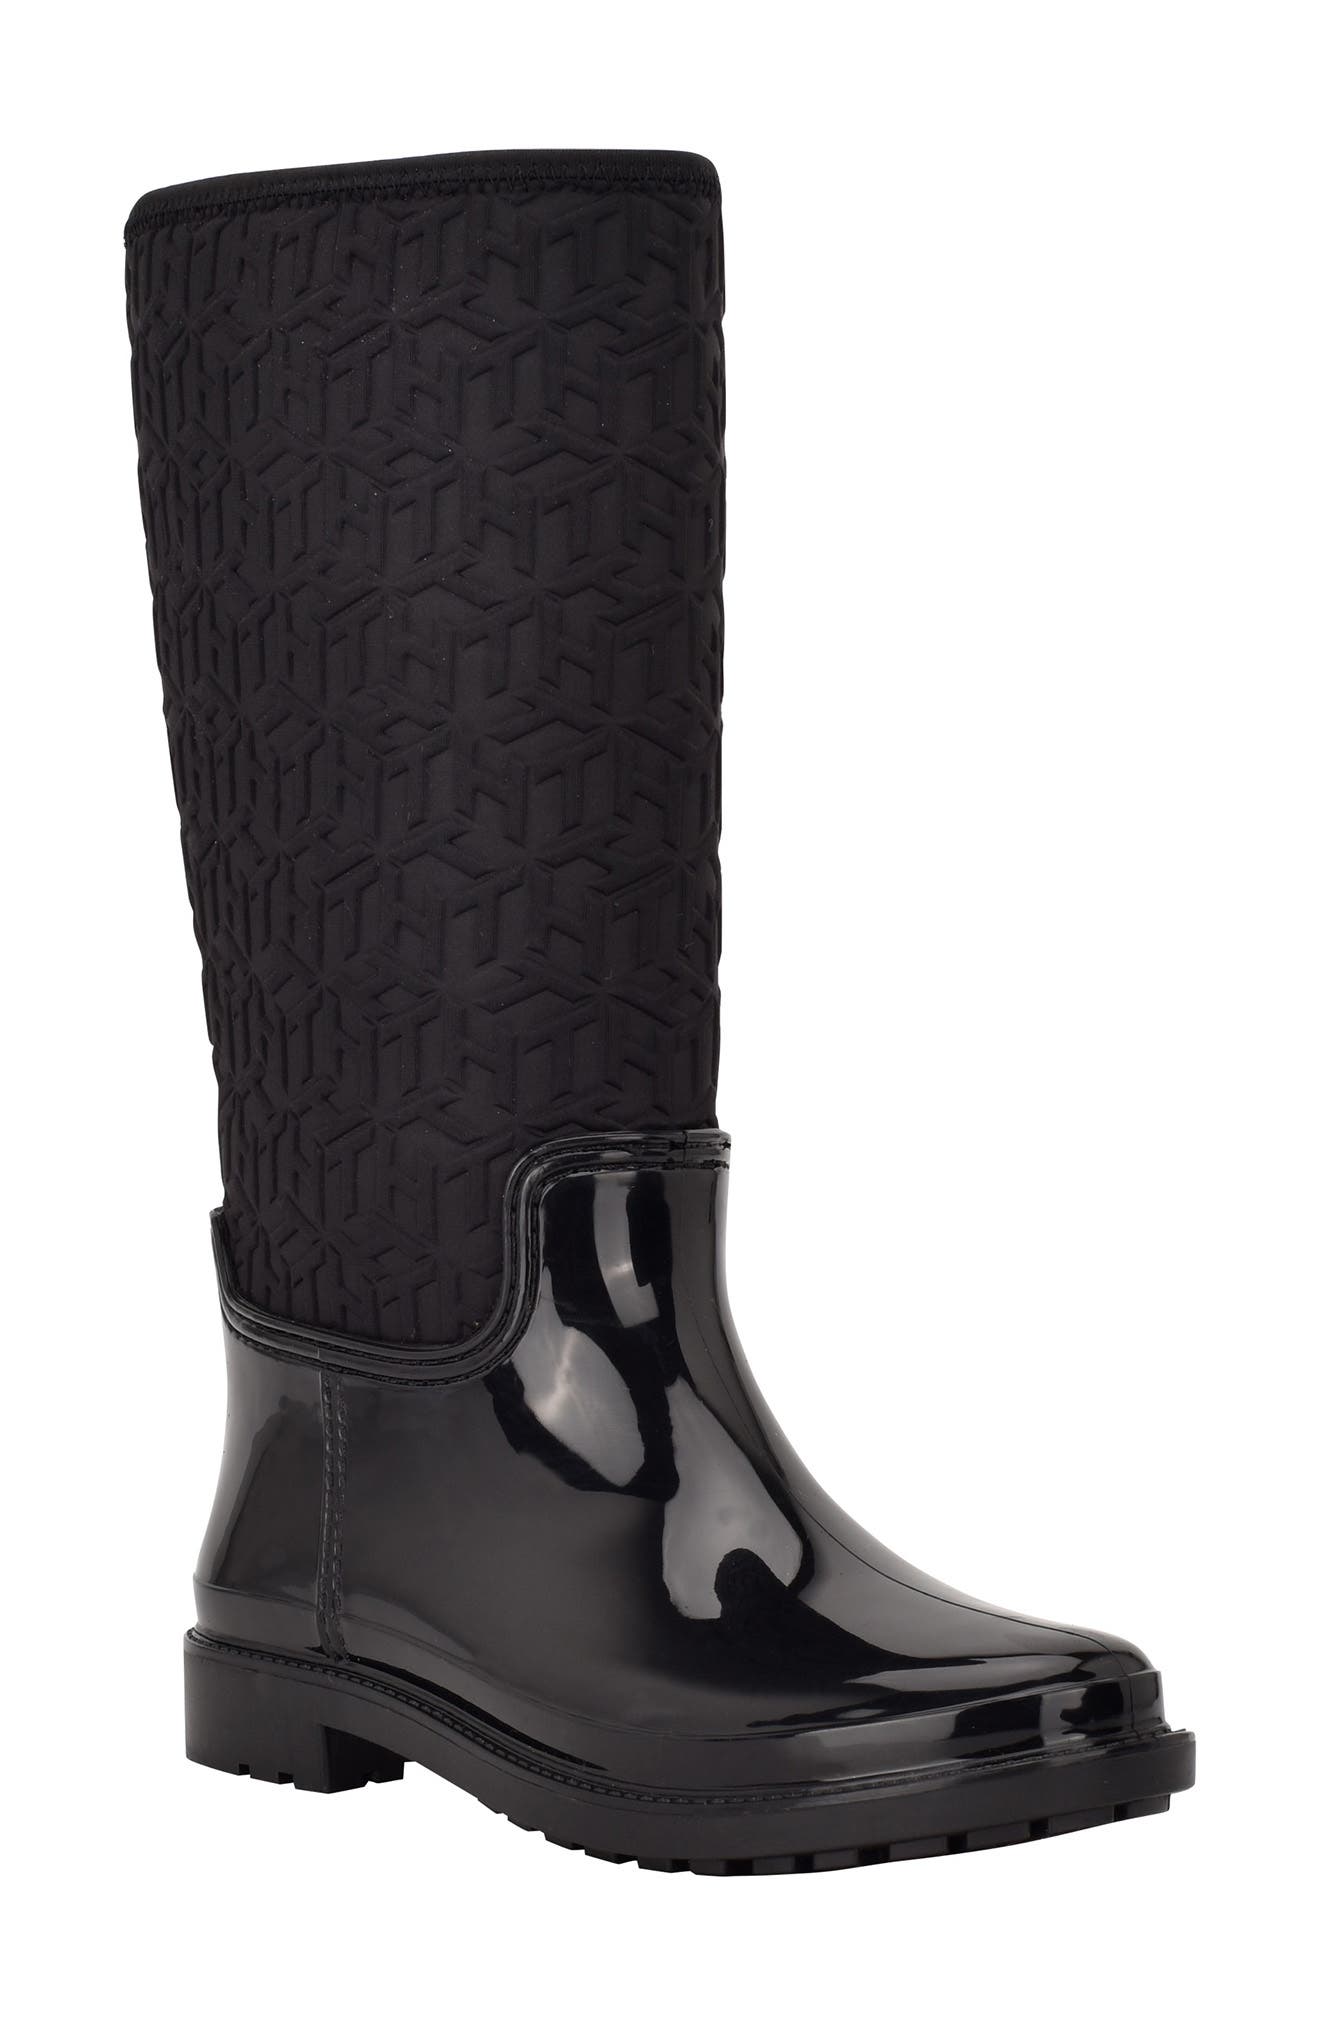 UPC 195972718159 product image for Tommy Hilfiger Saray Tall Waterproof Rain Boot in Black at Nordstrom, Size 5 | upcitemdb.com